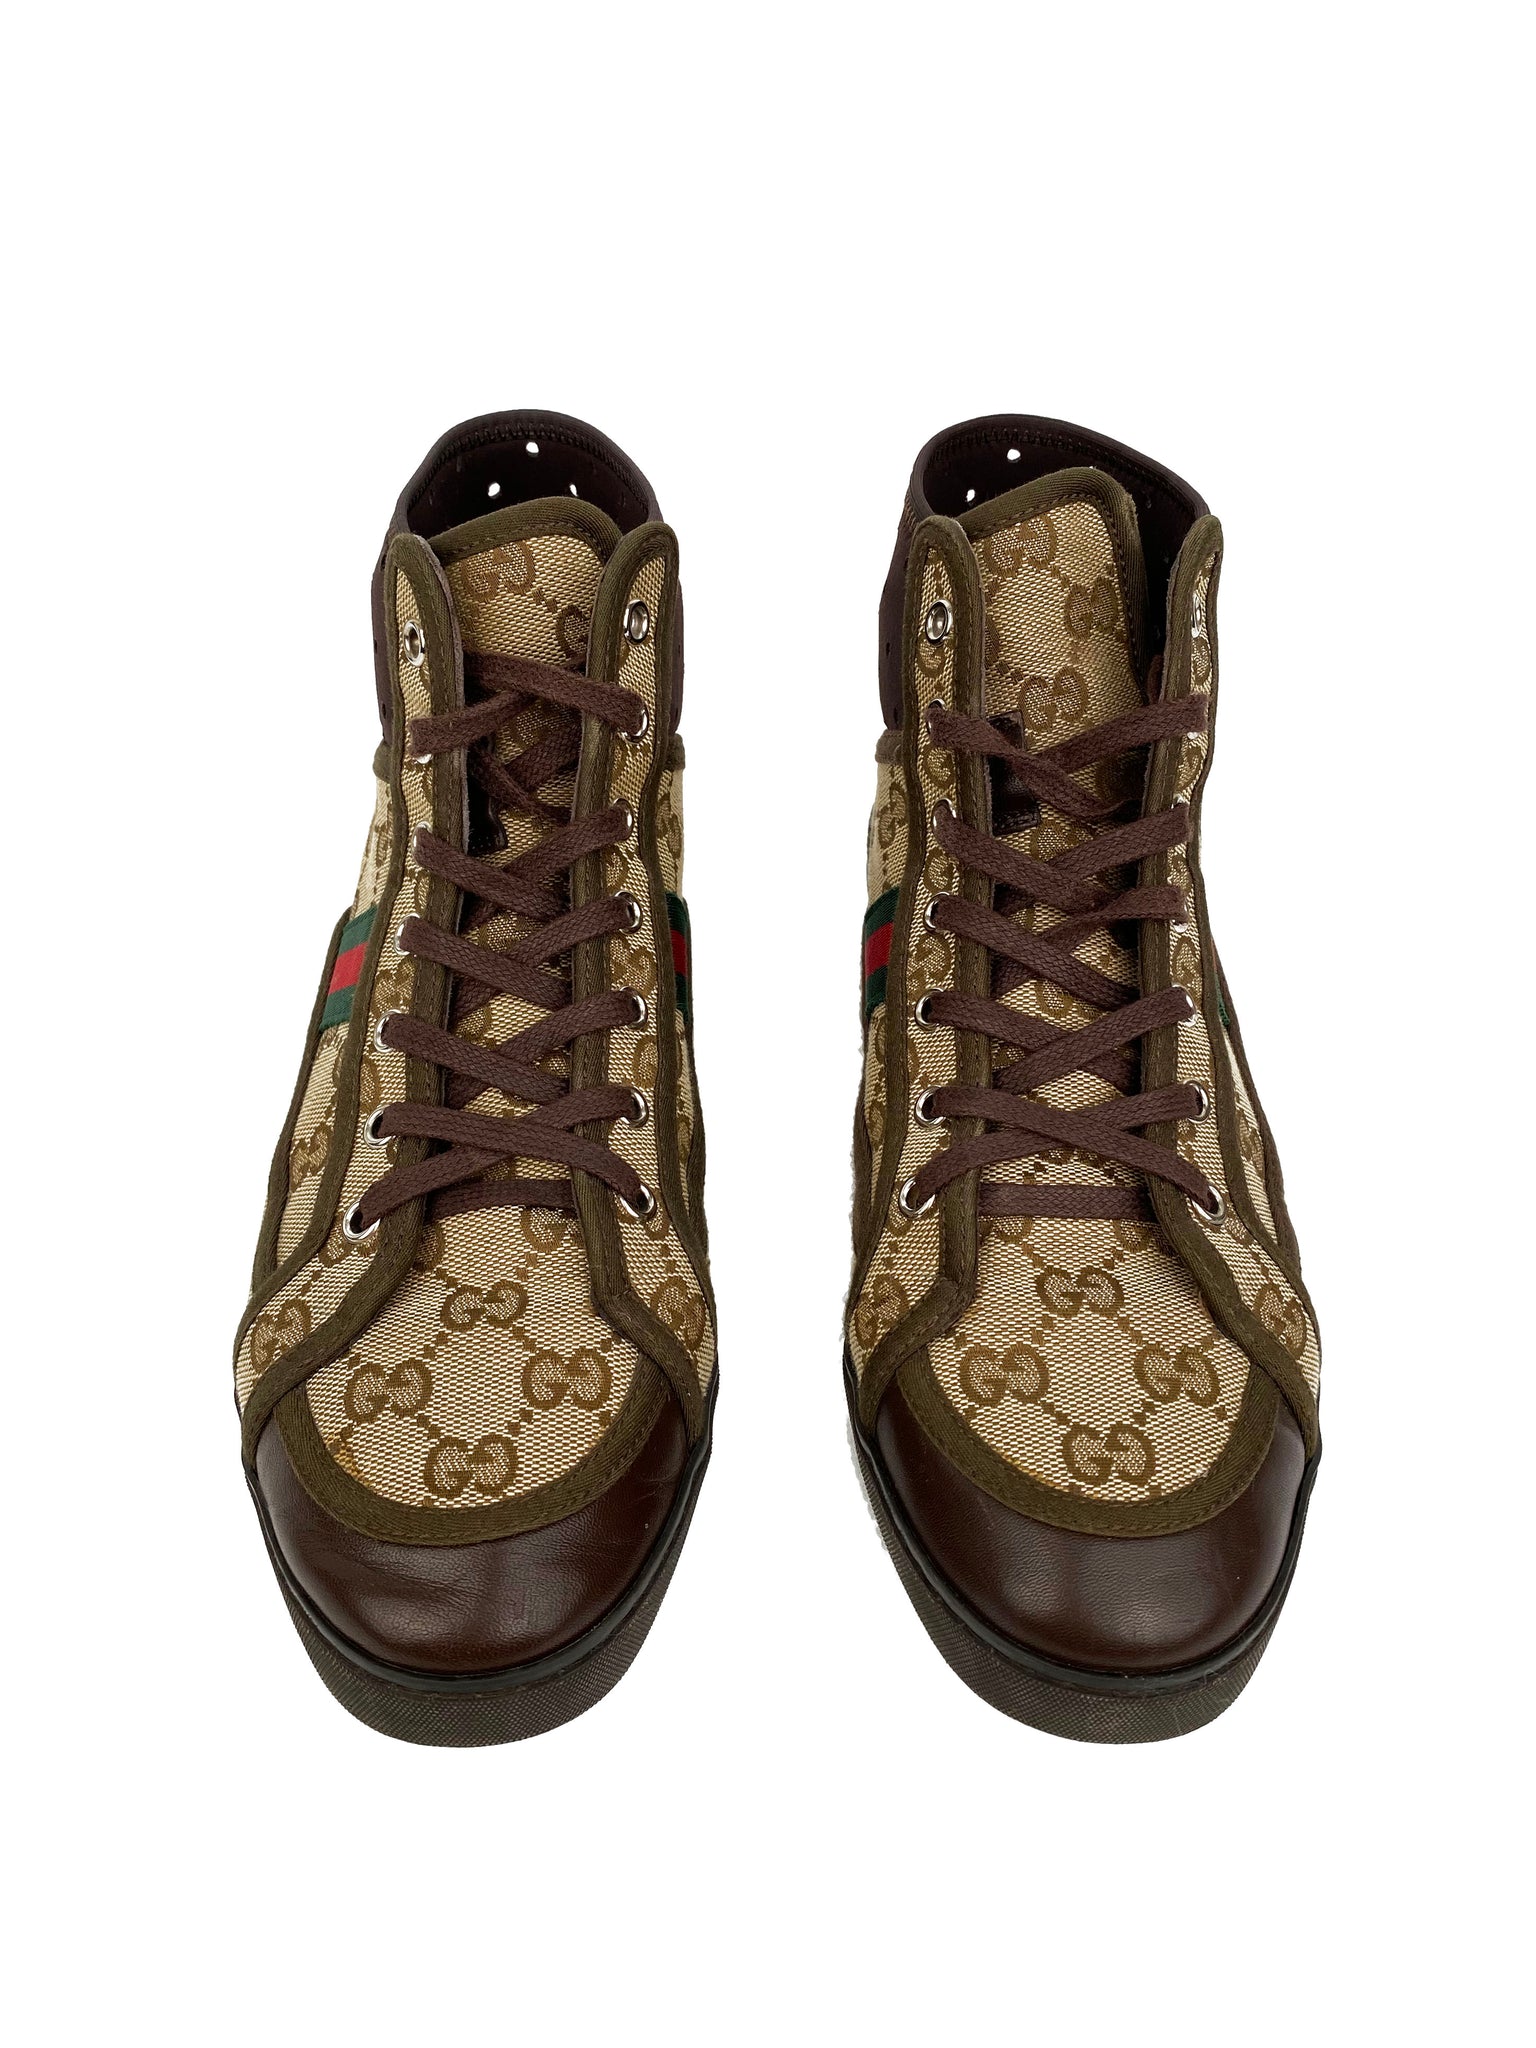 Gucci Monogram Cannes High-Top Sneakers 38